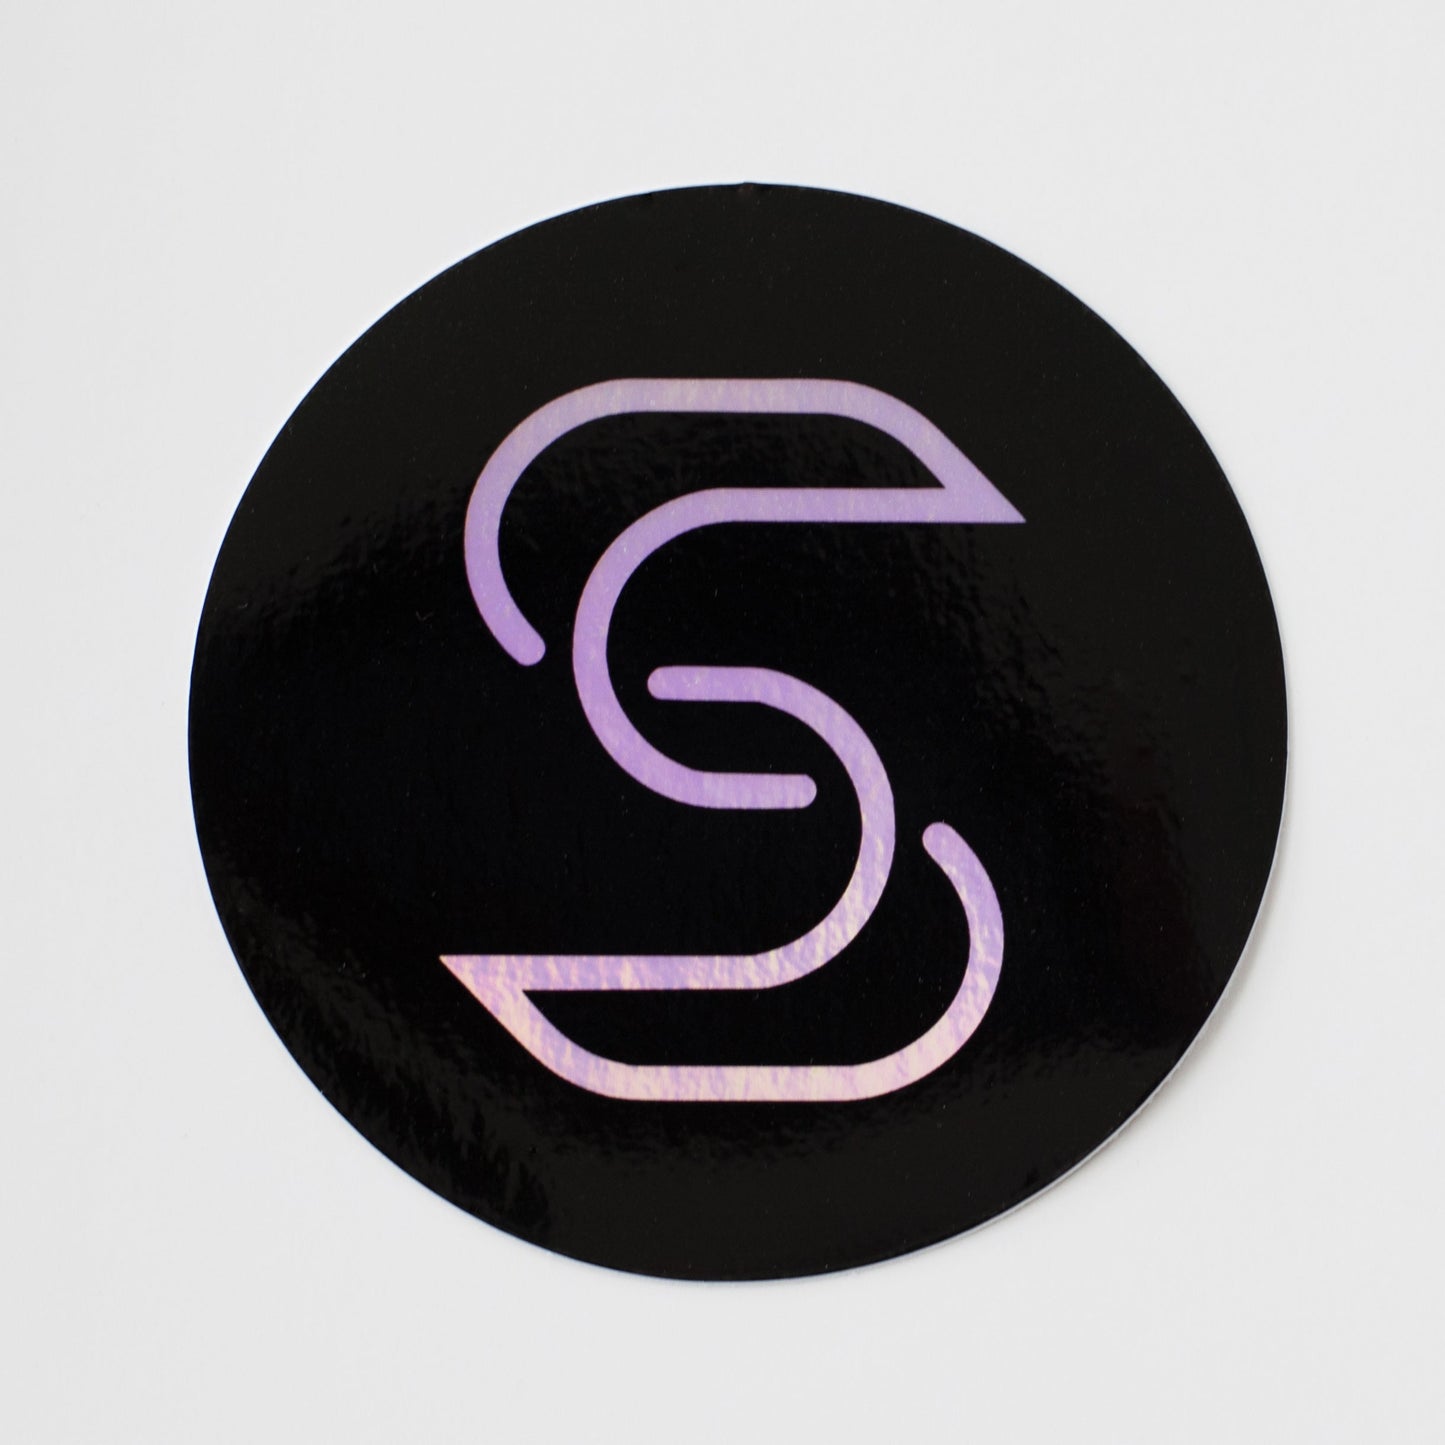 A holographic sticker of the Stickr logo on a white background